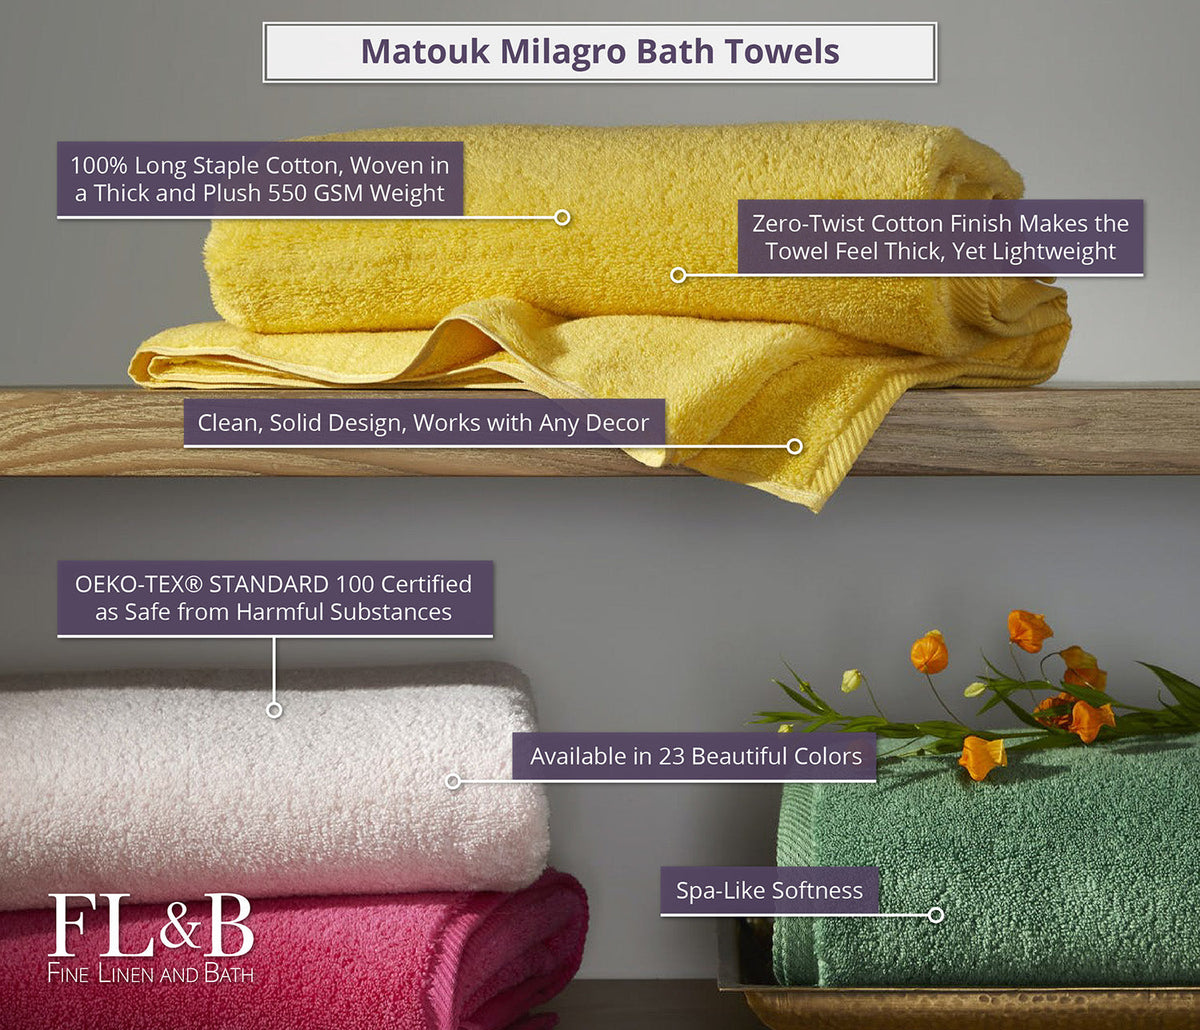 Matouk Milagro Bath Towels and Mats Folded Assorted Colors with Descriptive Labels